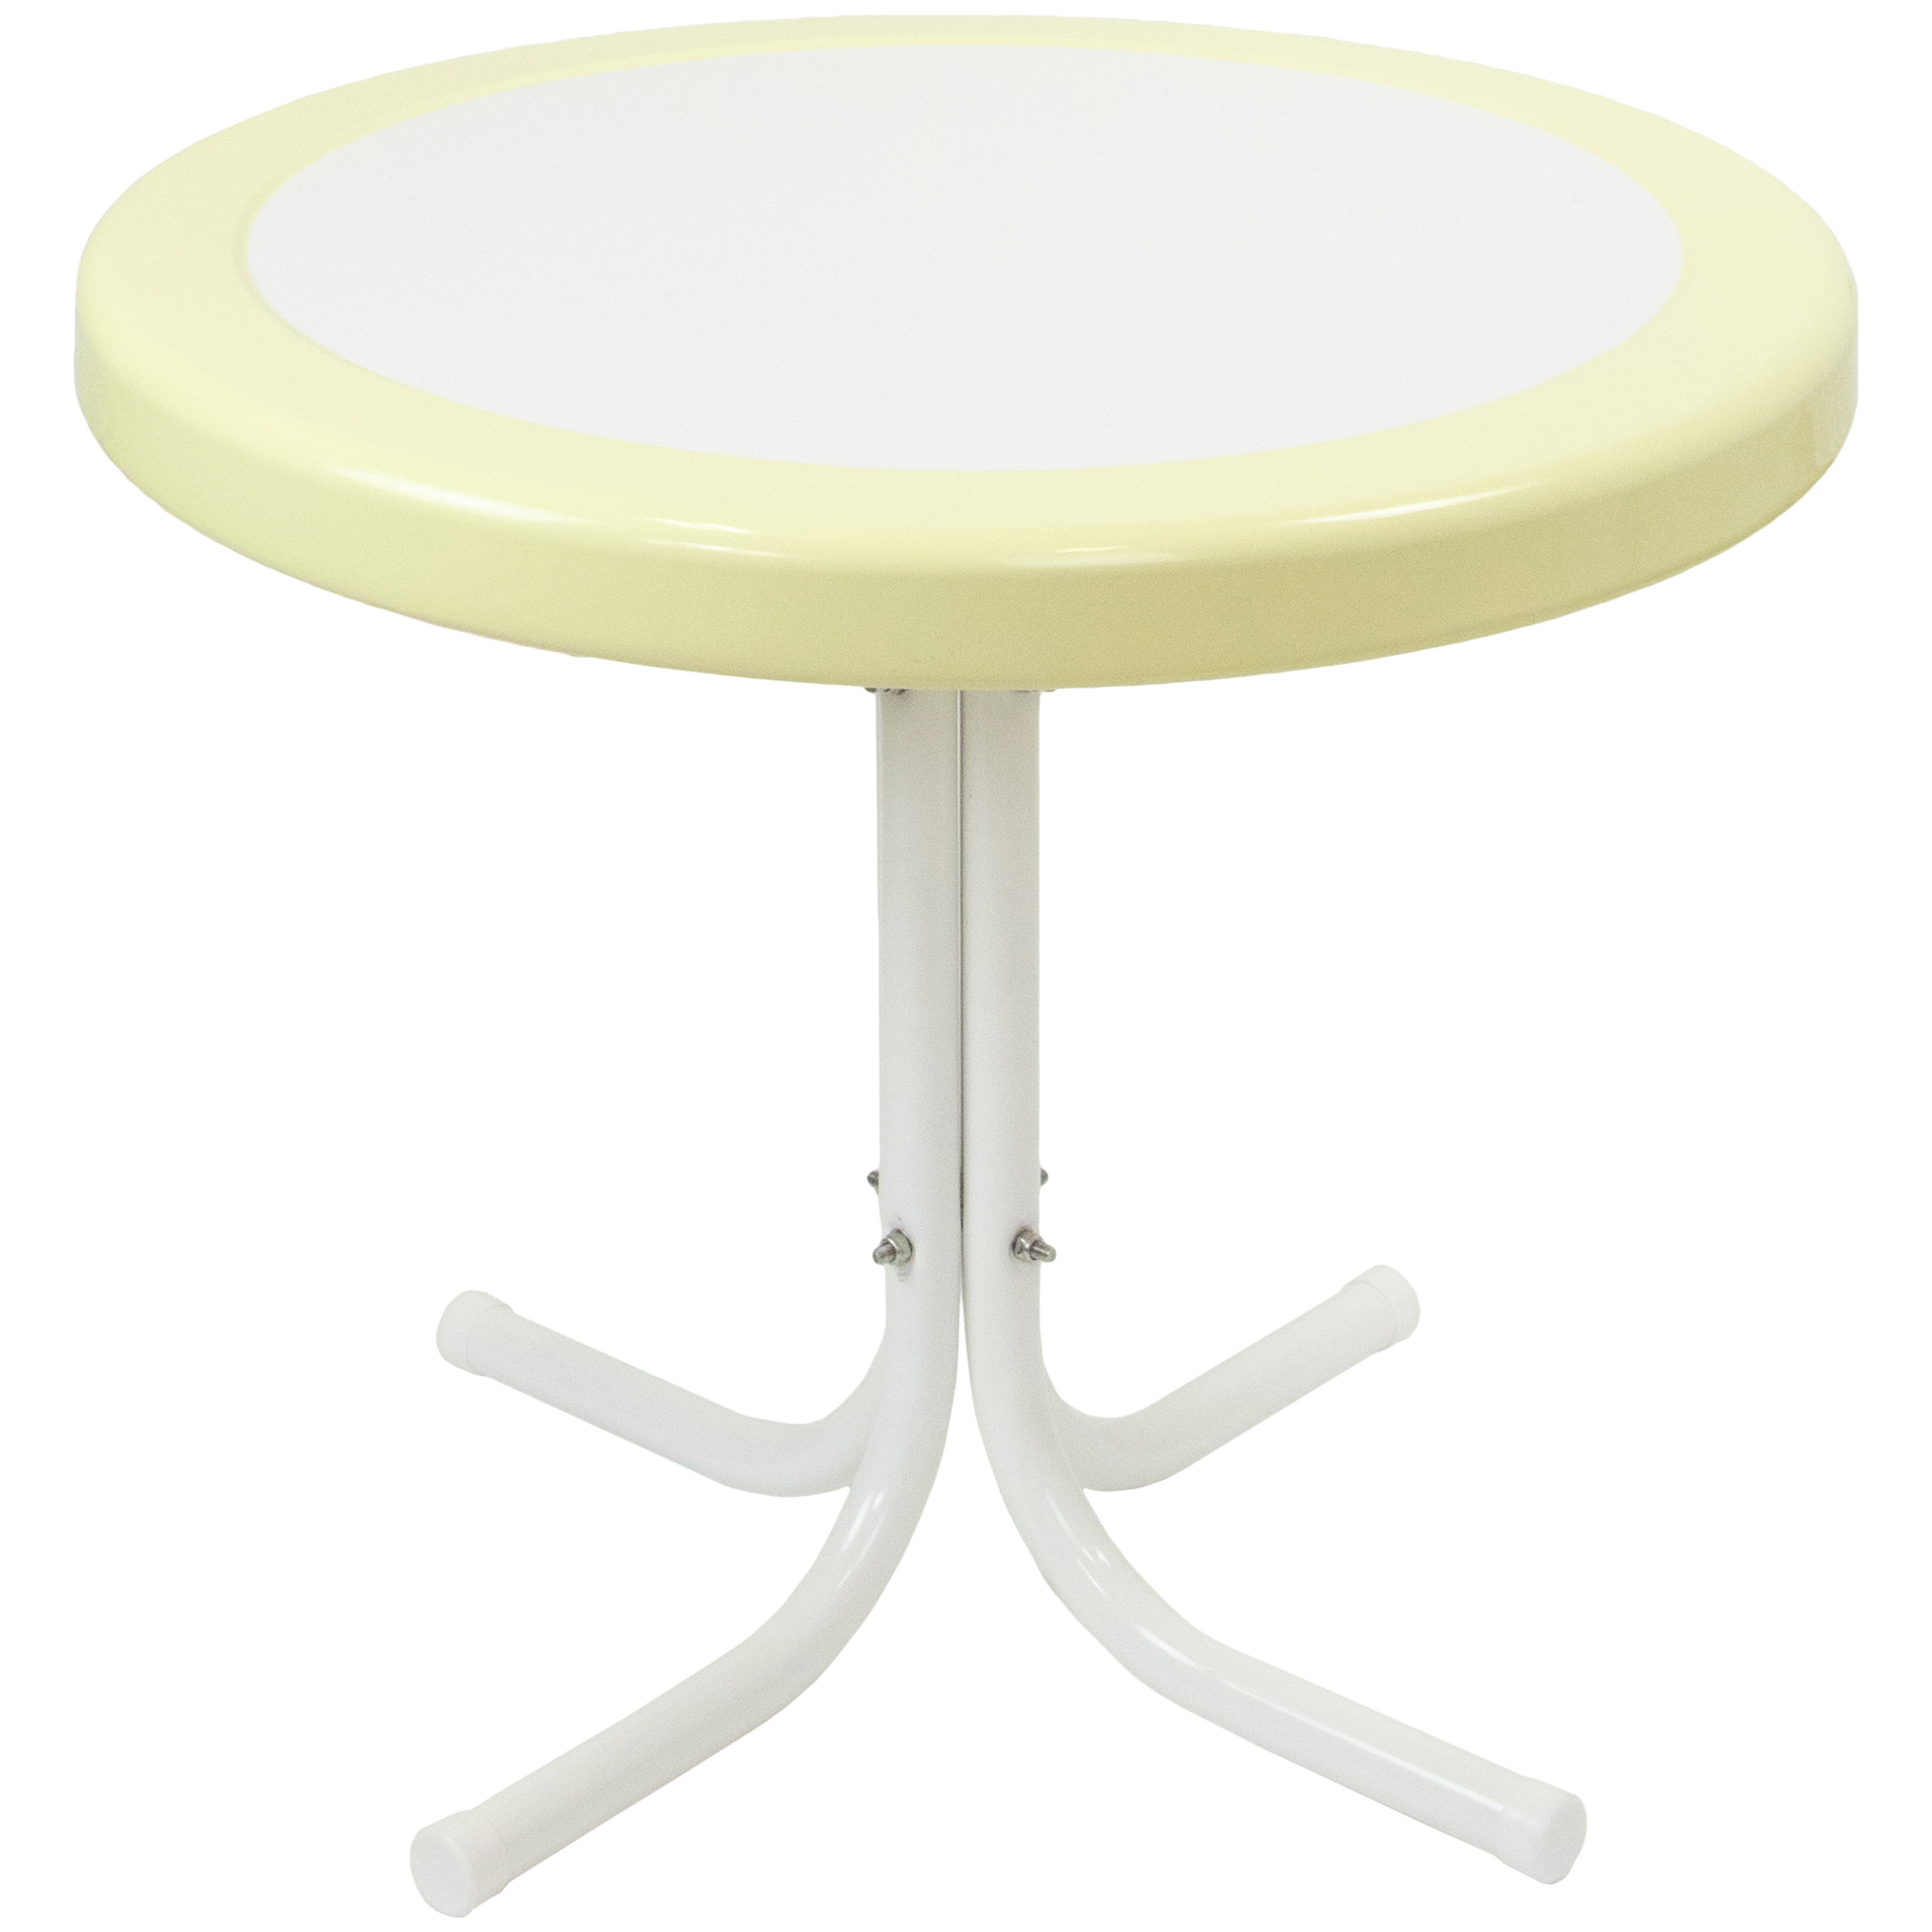 Northlight 22" Outdoor Retro Tulip Side Table, Yellow and White - image 1 of 4